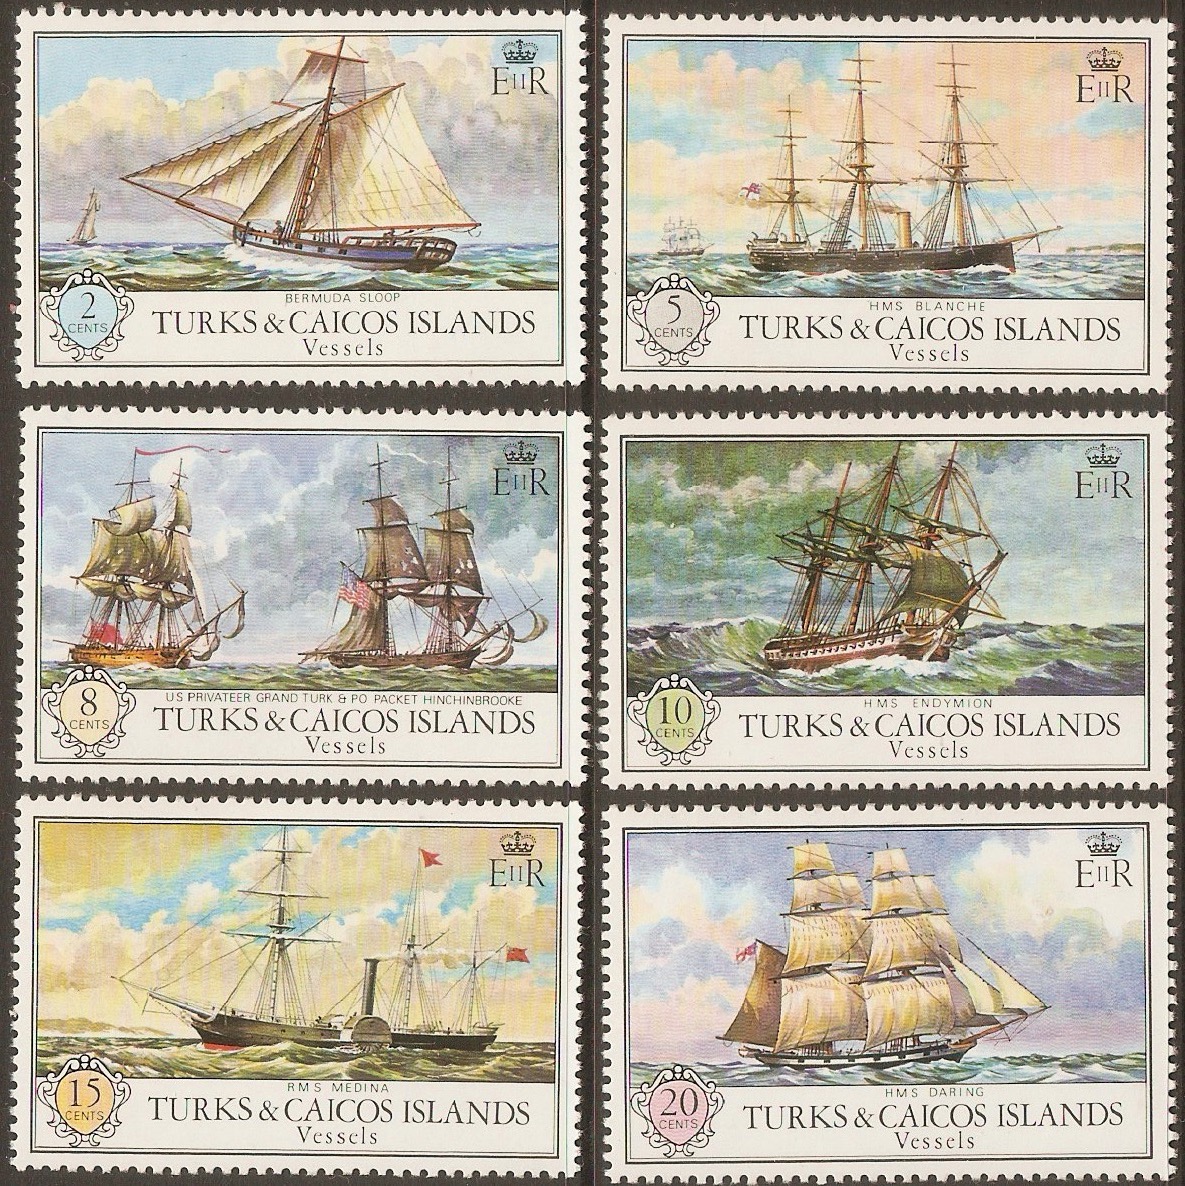 Turk and Caicos Islands 1973 Vessels set. SG396-SG401.